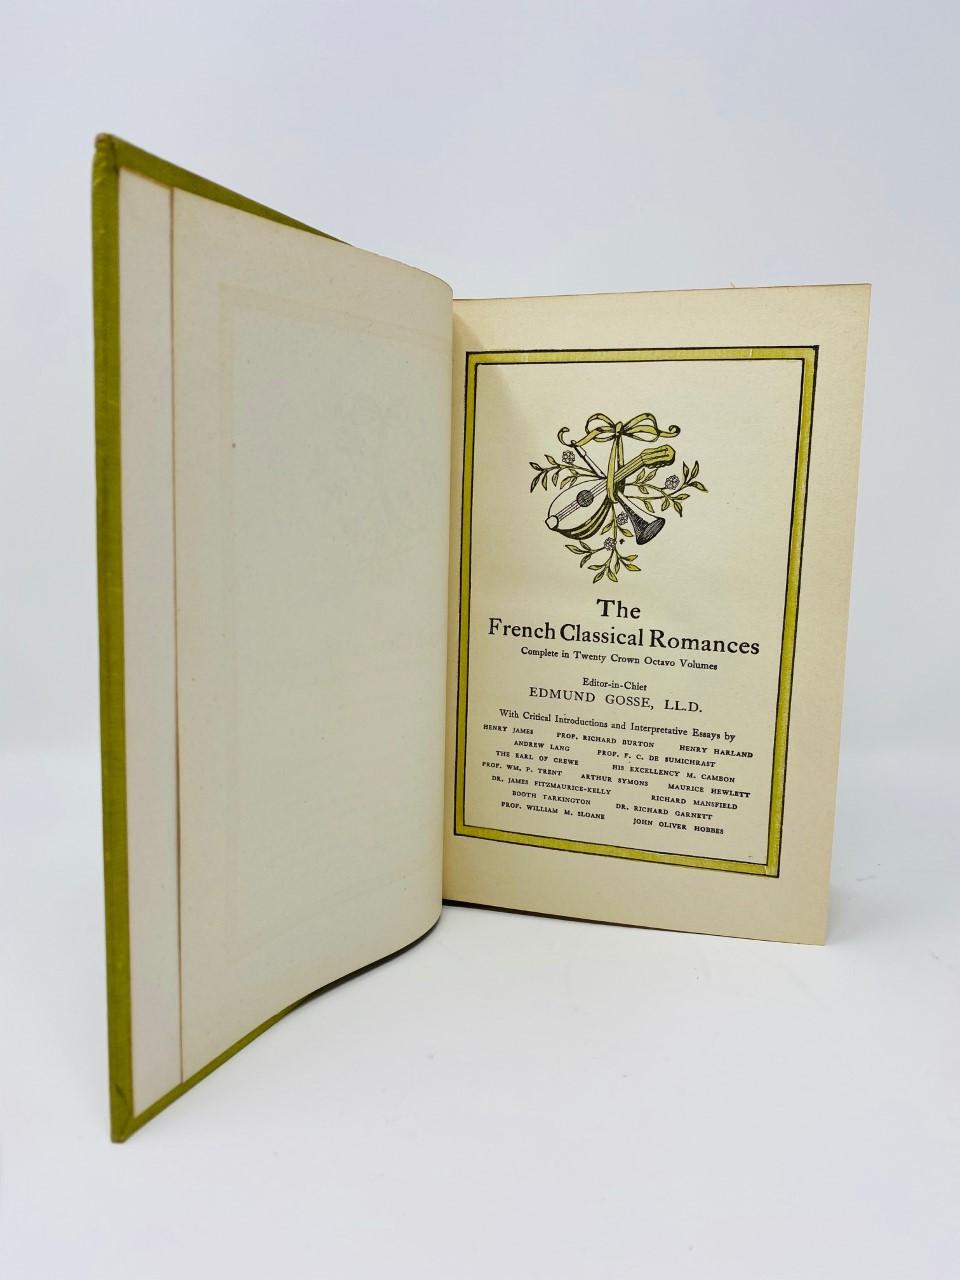 Paper The French Classical Romances Book Edition 1902 by P.F. Collier & Son, New York